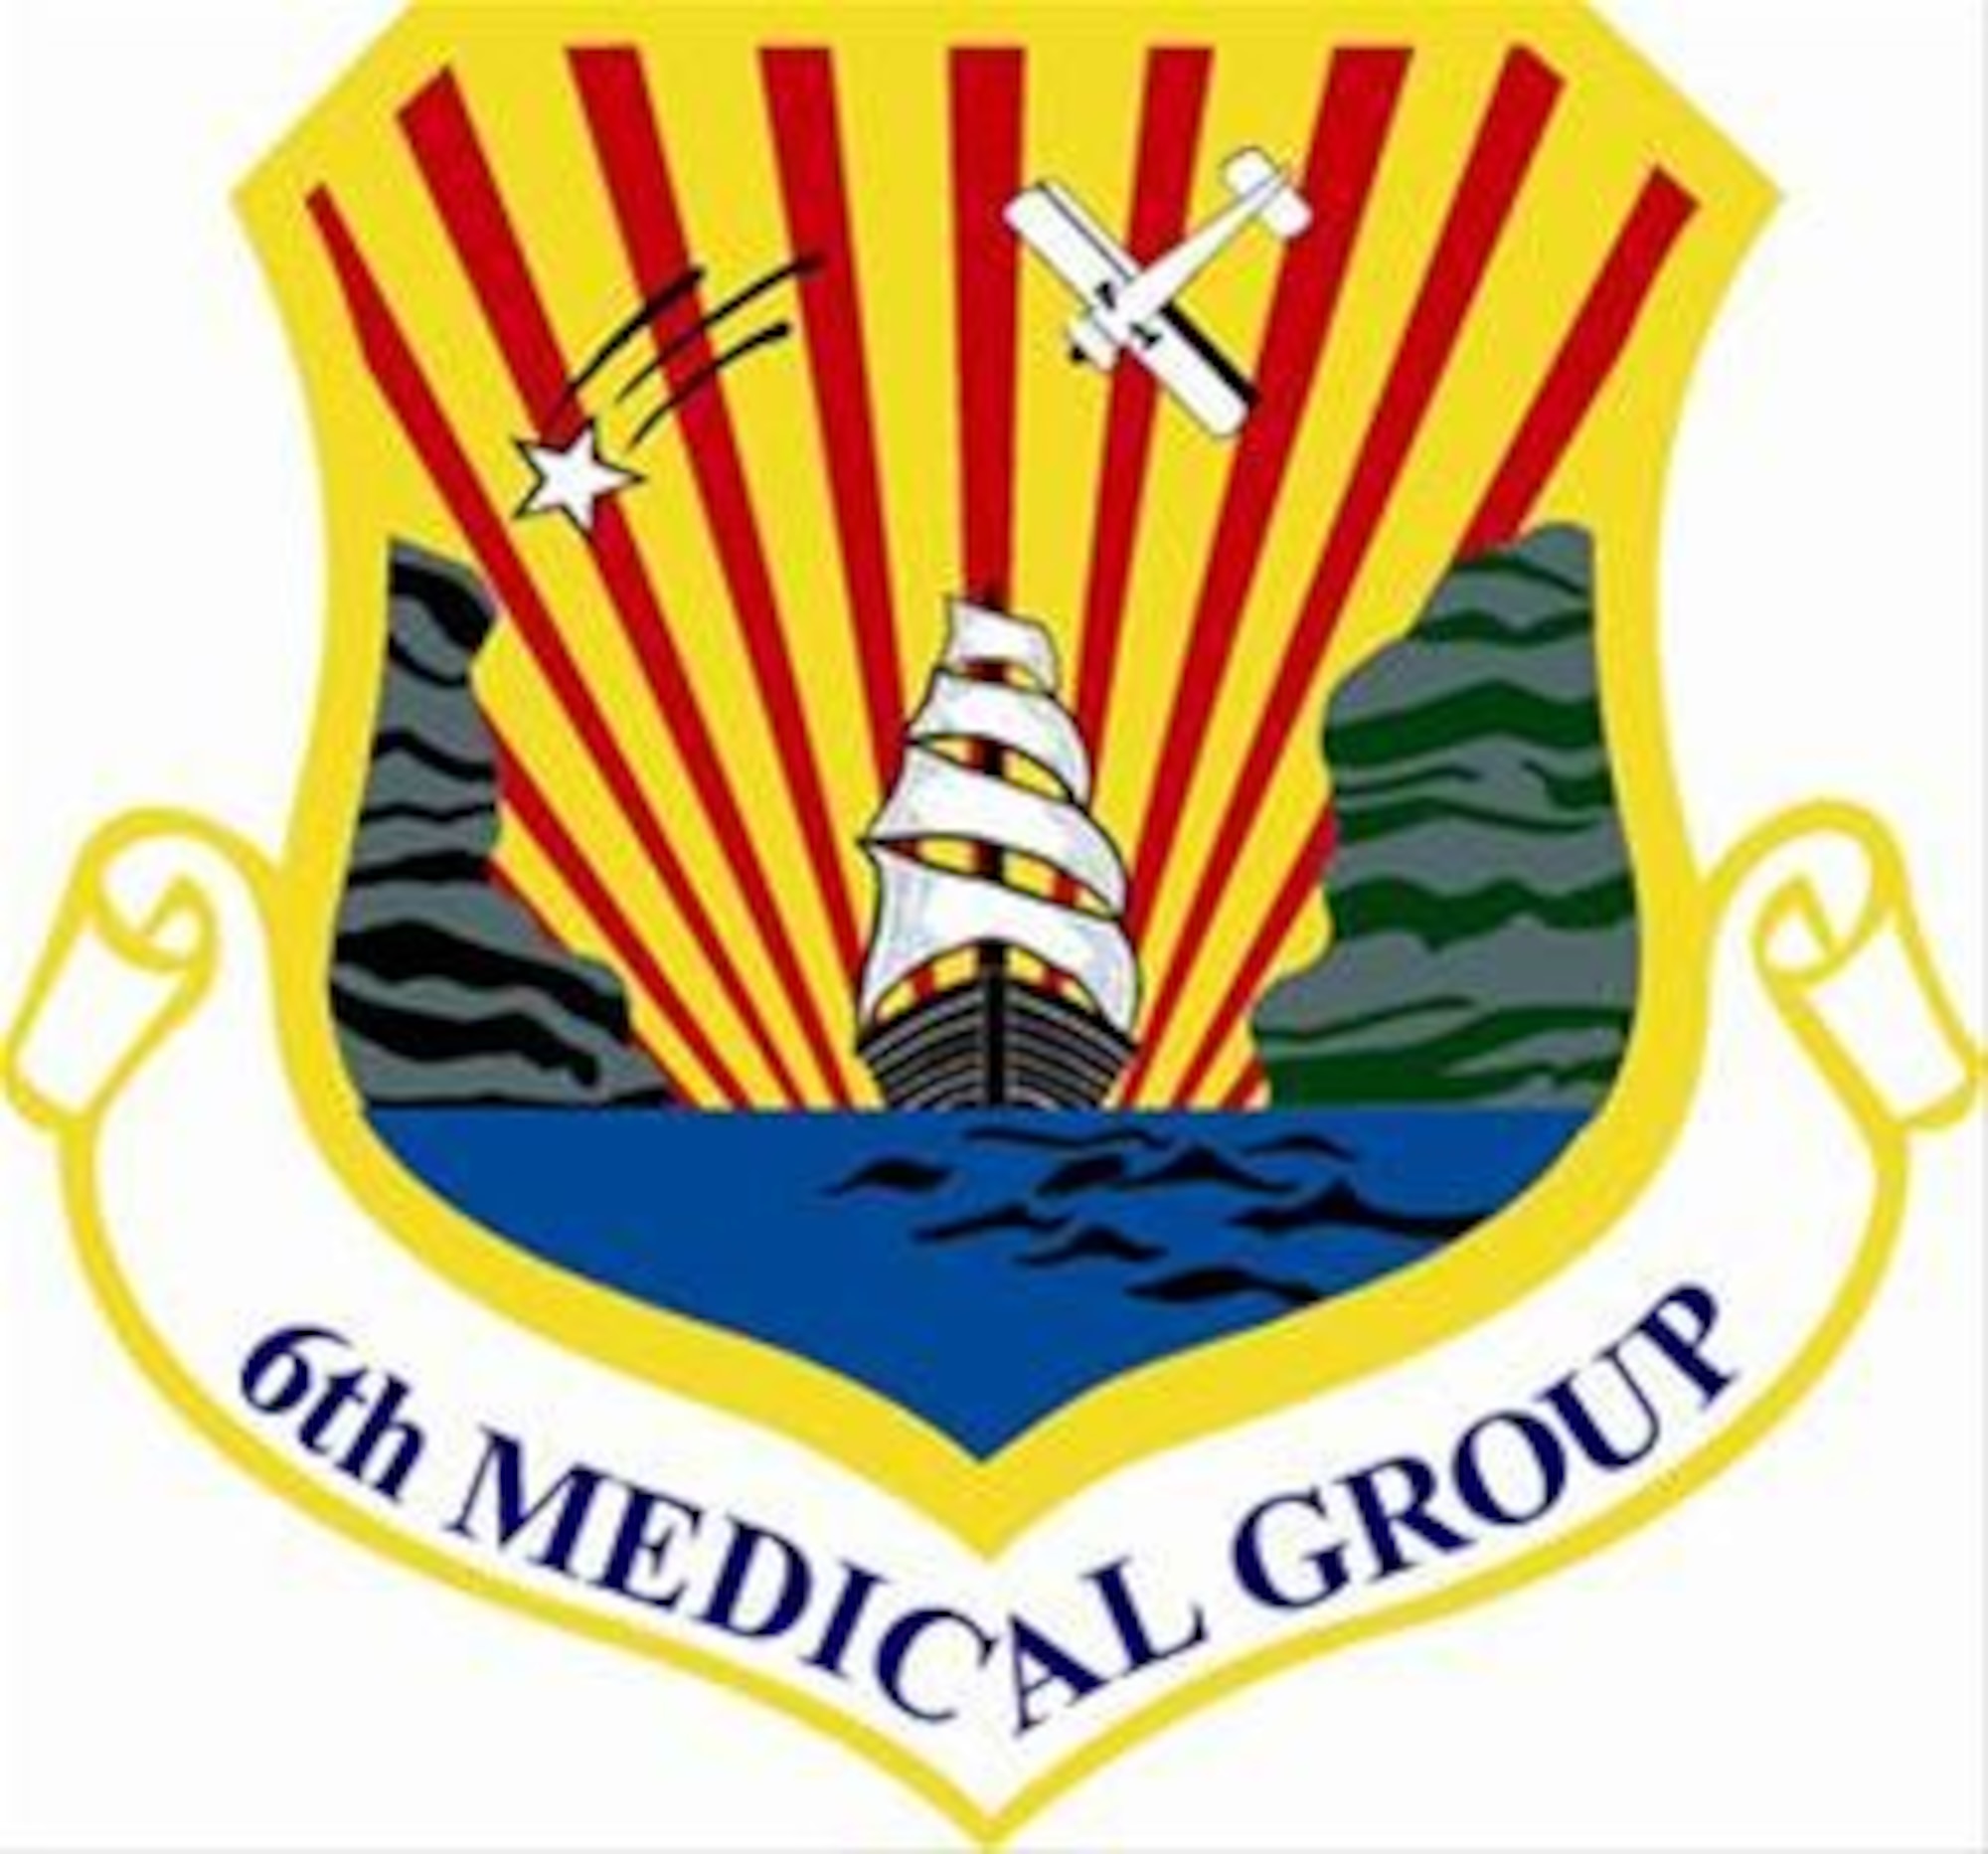 6th Medical Group